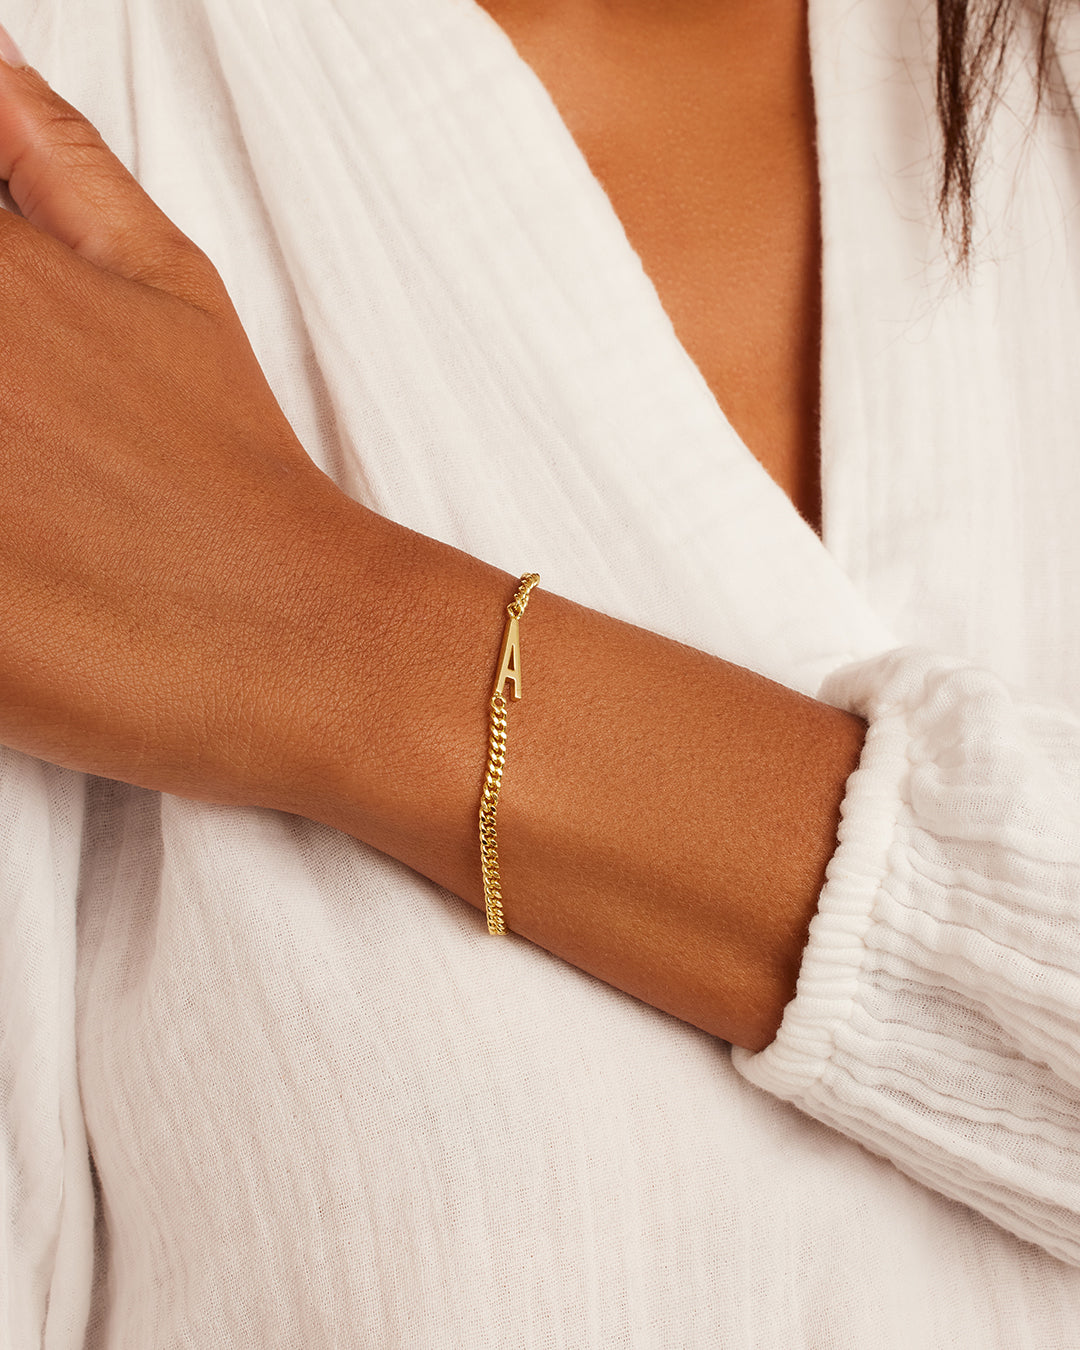 Fashion Girls Gold Color Stainless Steel Heart Bracelet Bangle With Le –  catchajewel.com